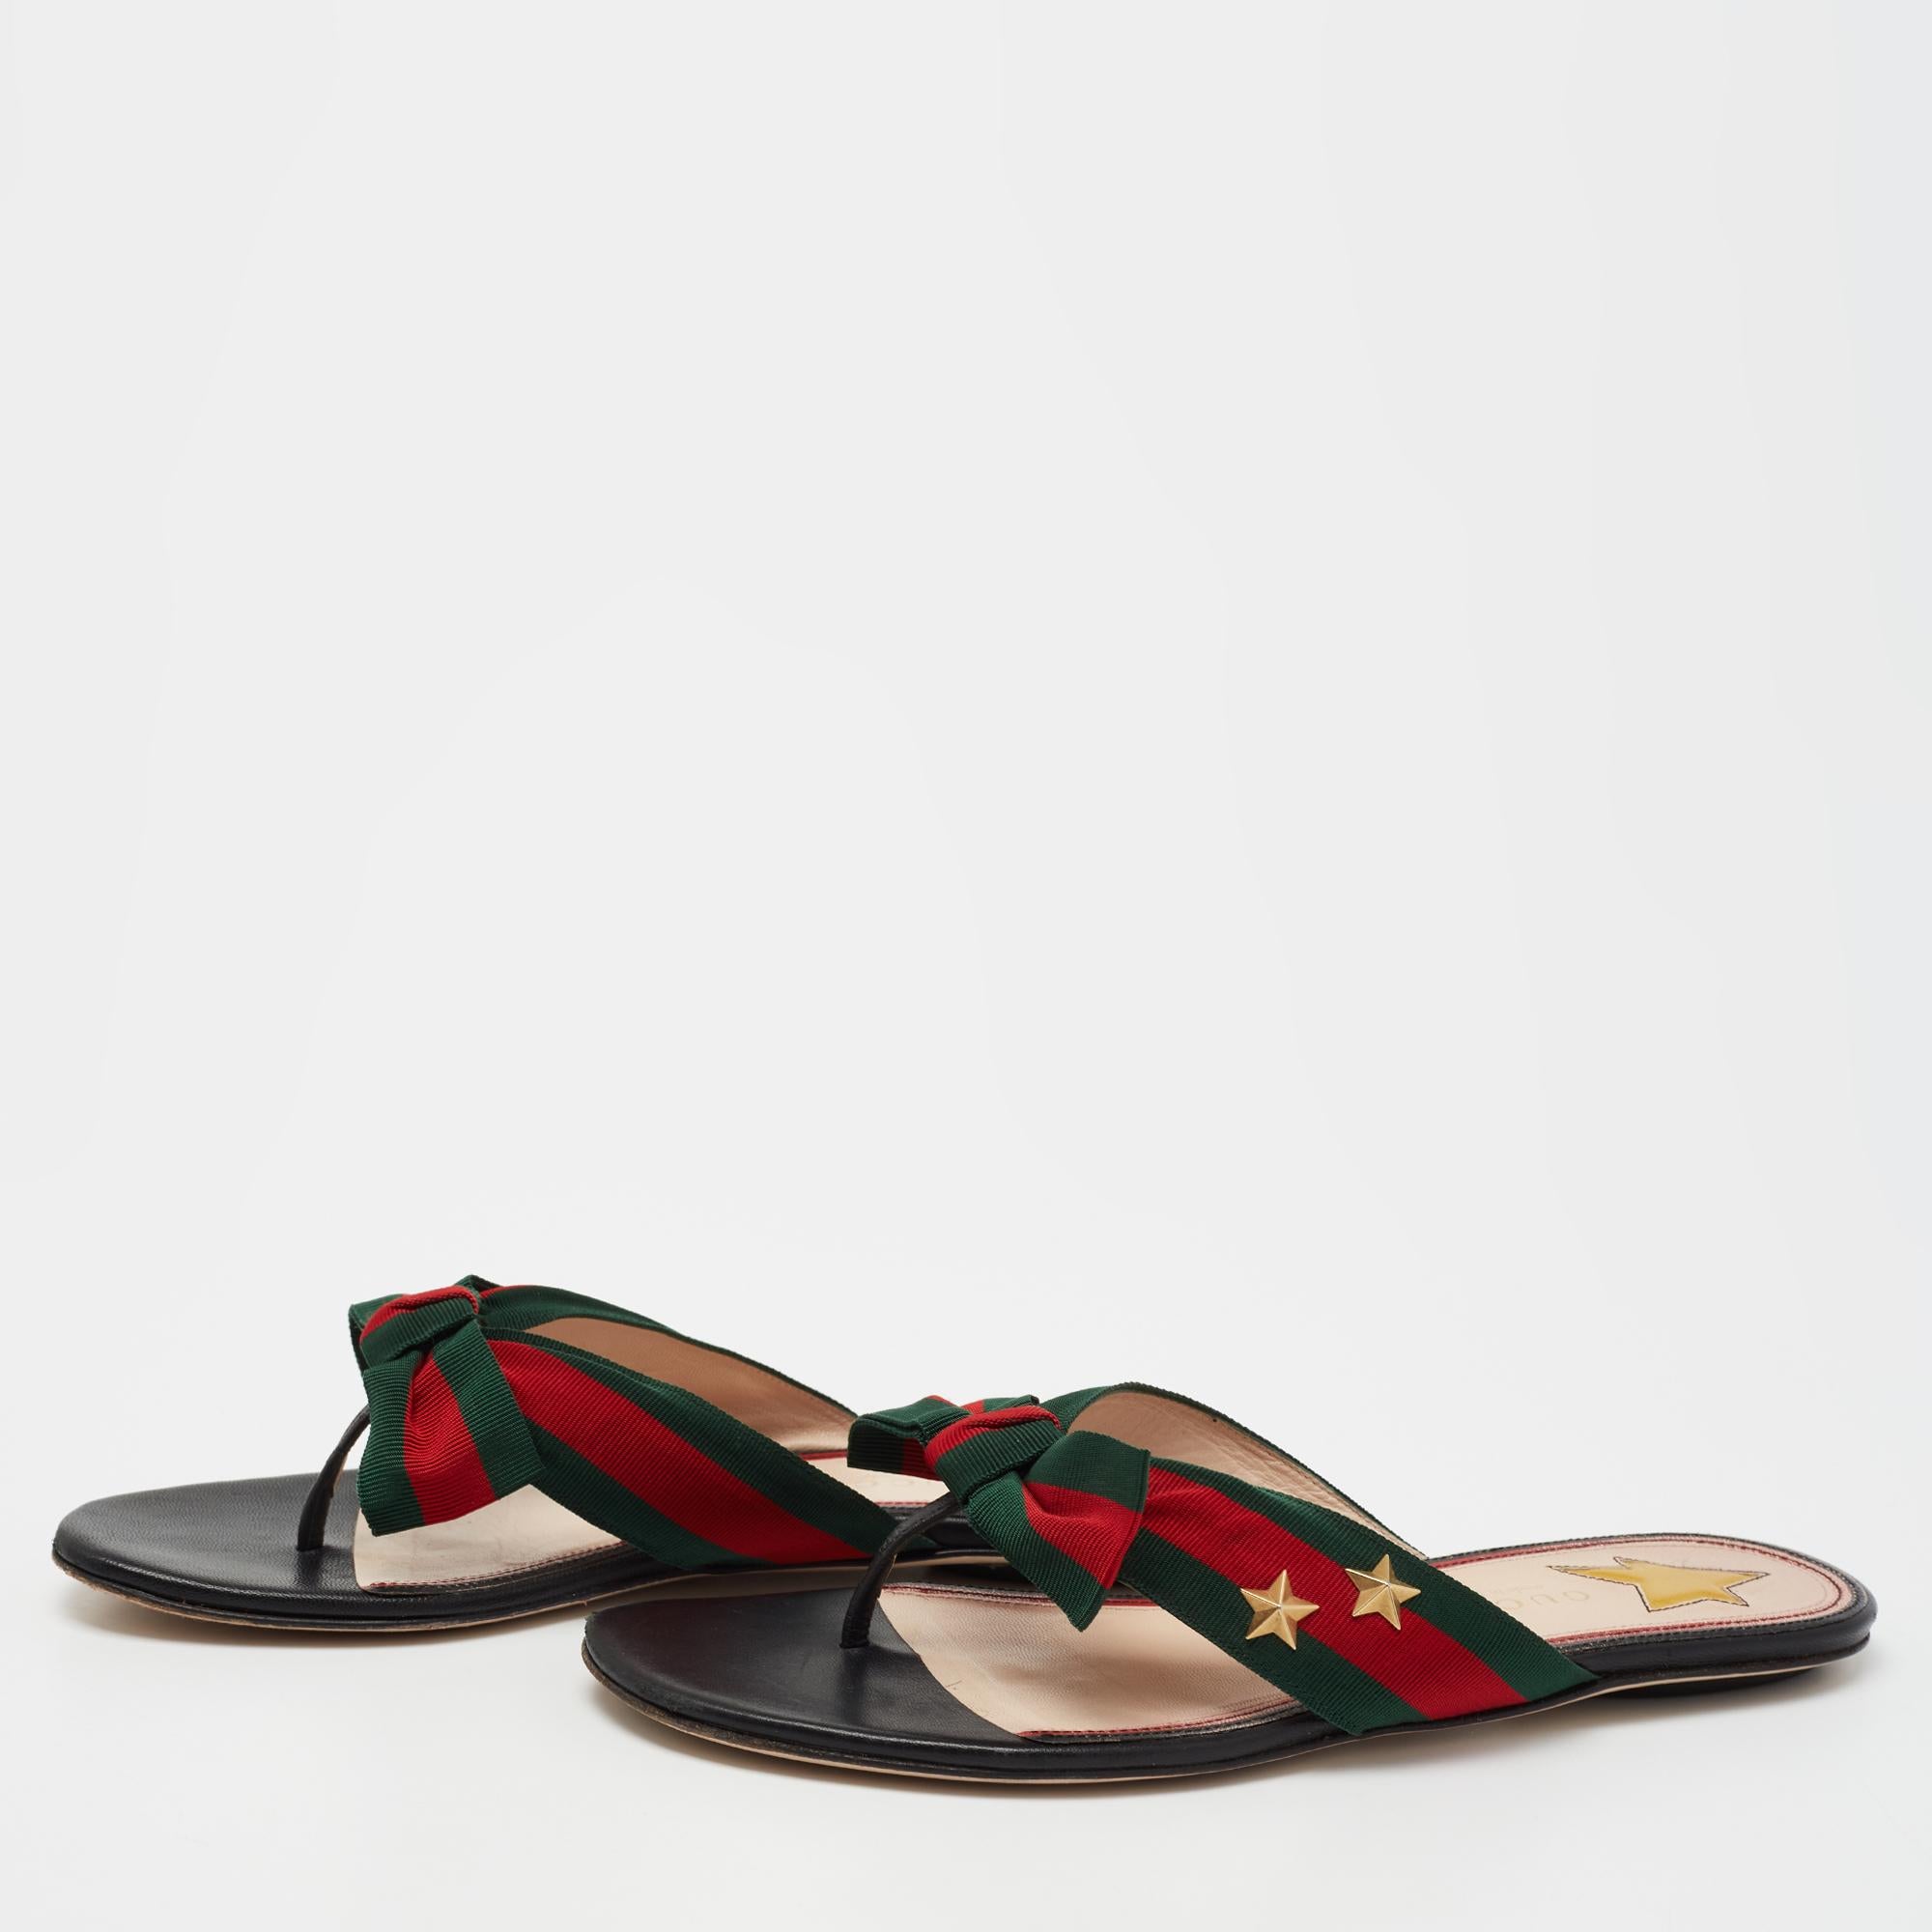 Lend your feet with complete comfort and luxury in these thong flats from the House of Gucci. They are fashioned from black leather, which is embellished with a Web stripe and bow accent on the upper. These thong sandals are completed with